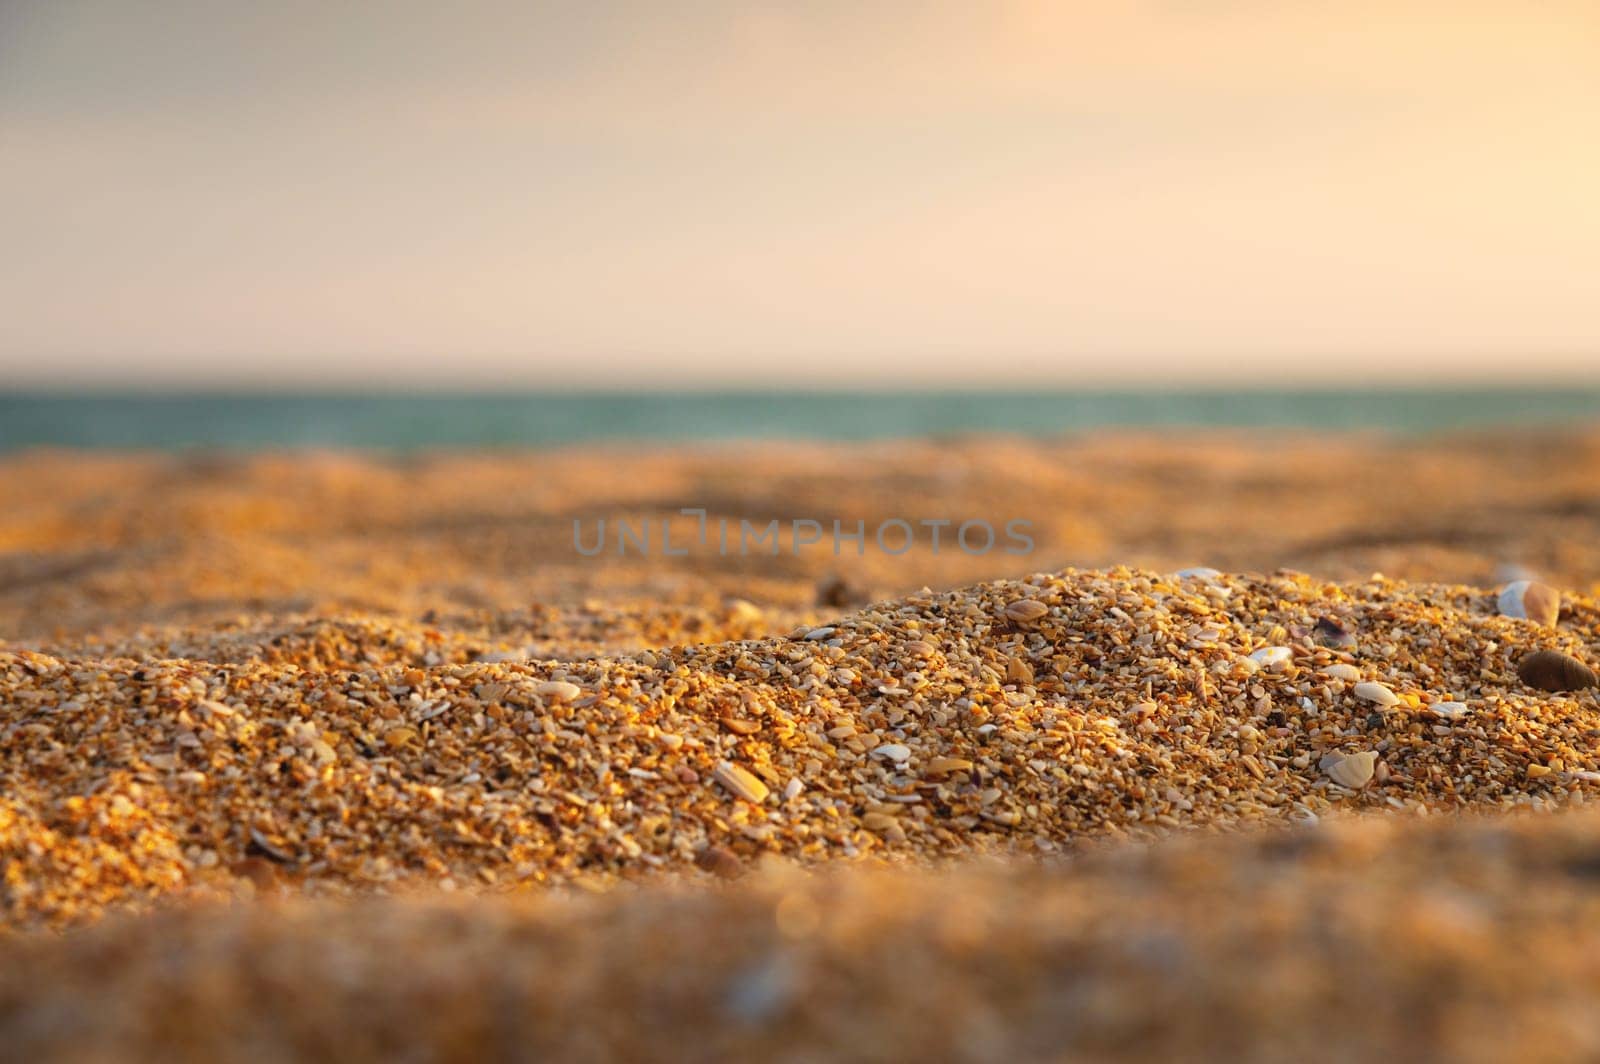 Close-up of shell golden sand in shallow depth of field with sea or ocean in the background at sunset. Marine background in warm colors by yanik88